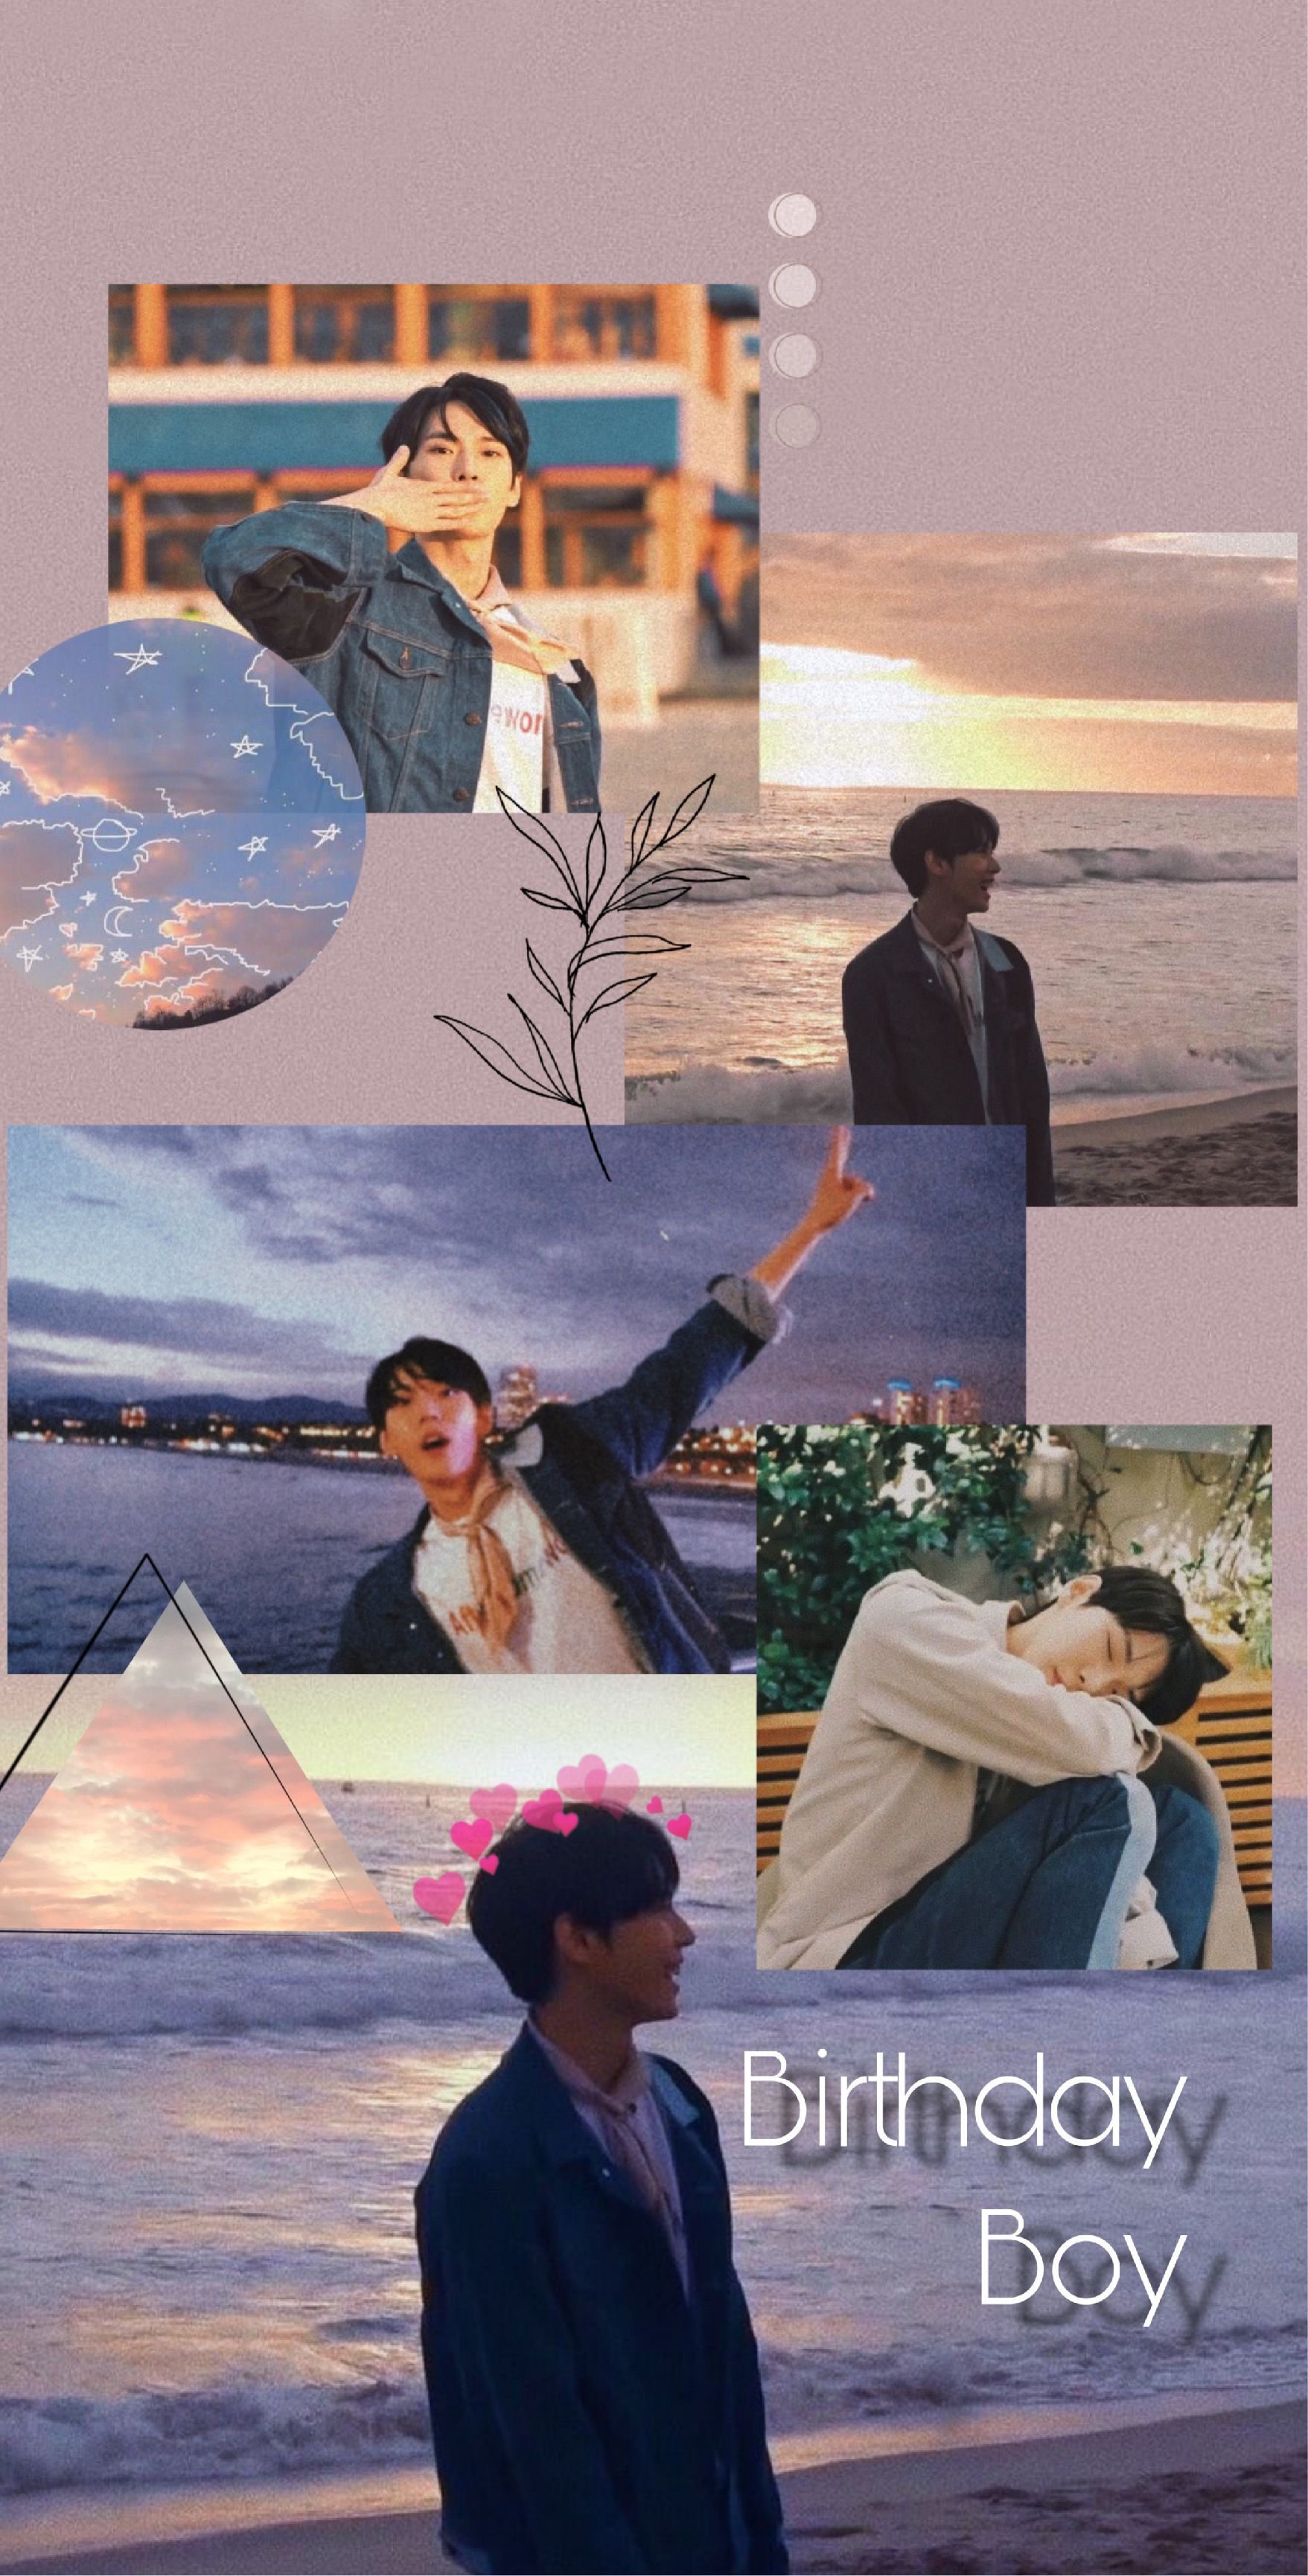 NCT Doyoung wallpaper aesthetic cute edit #happydoyoungday